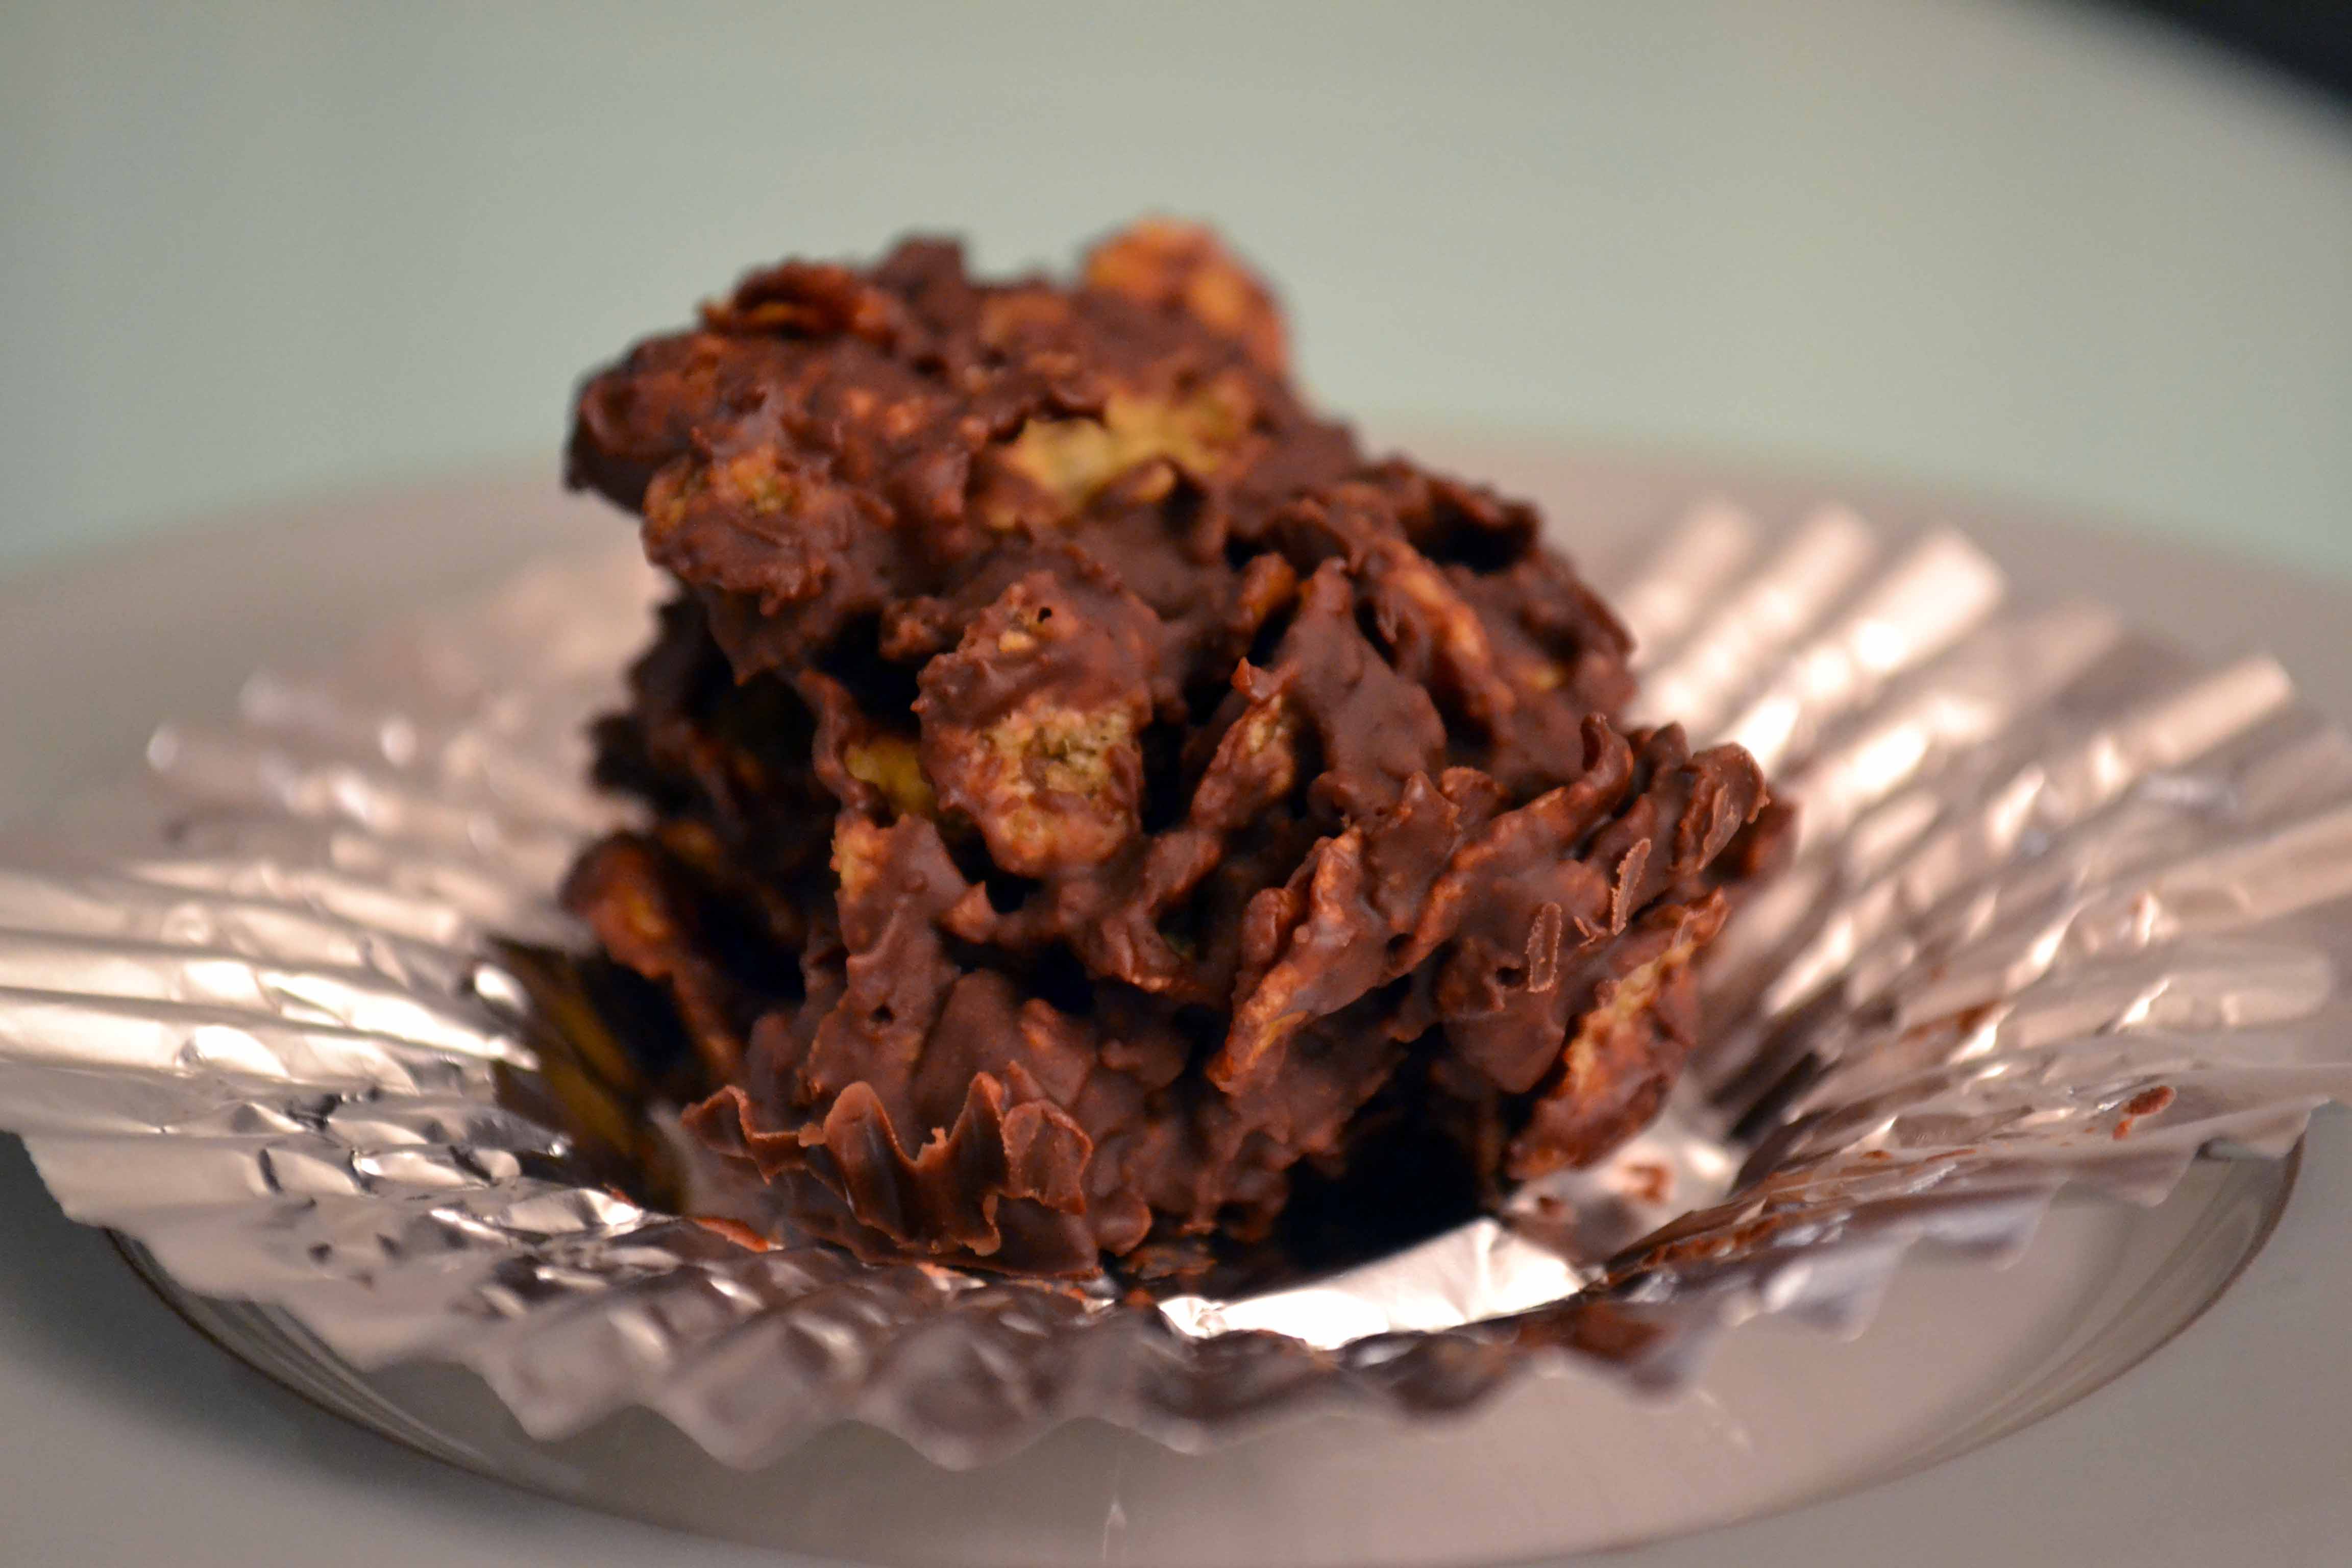 Chocolate Corn Flake Clusters - Measuring Cups, Optional